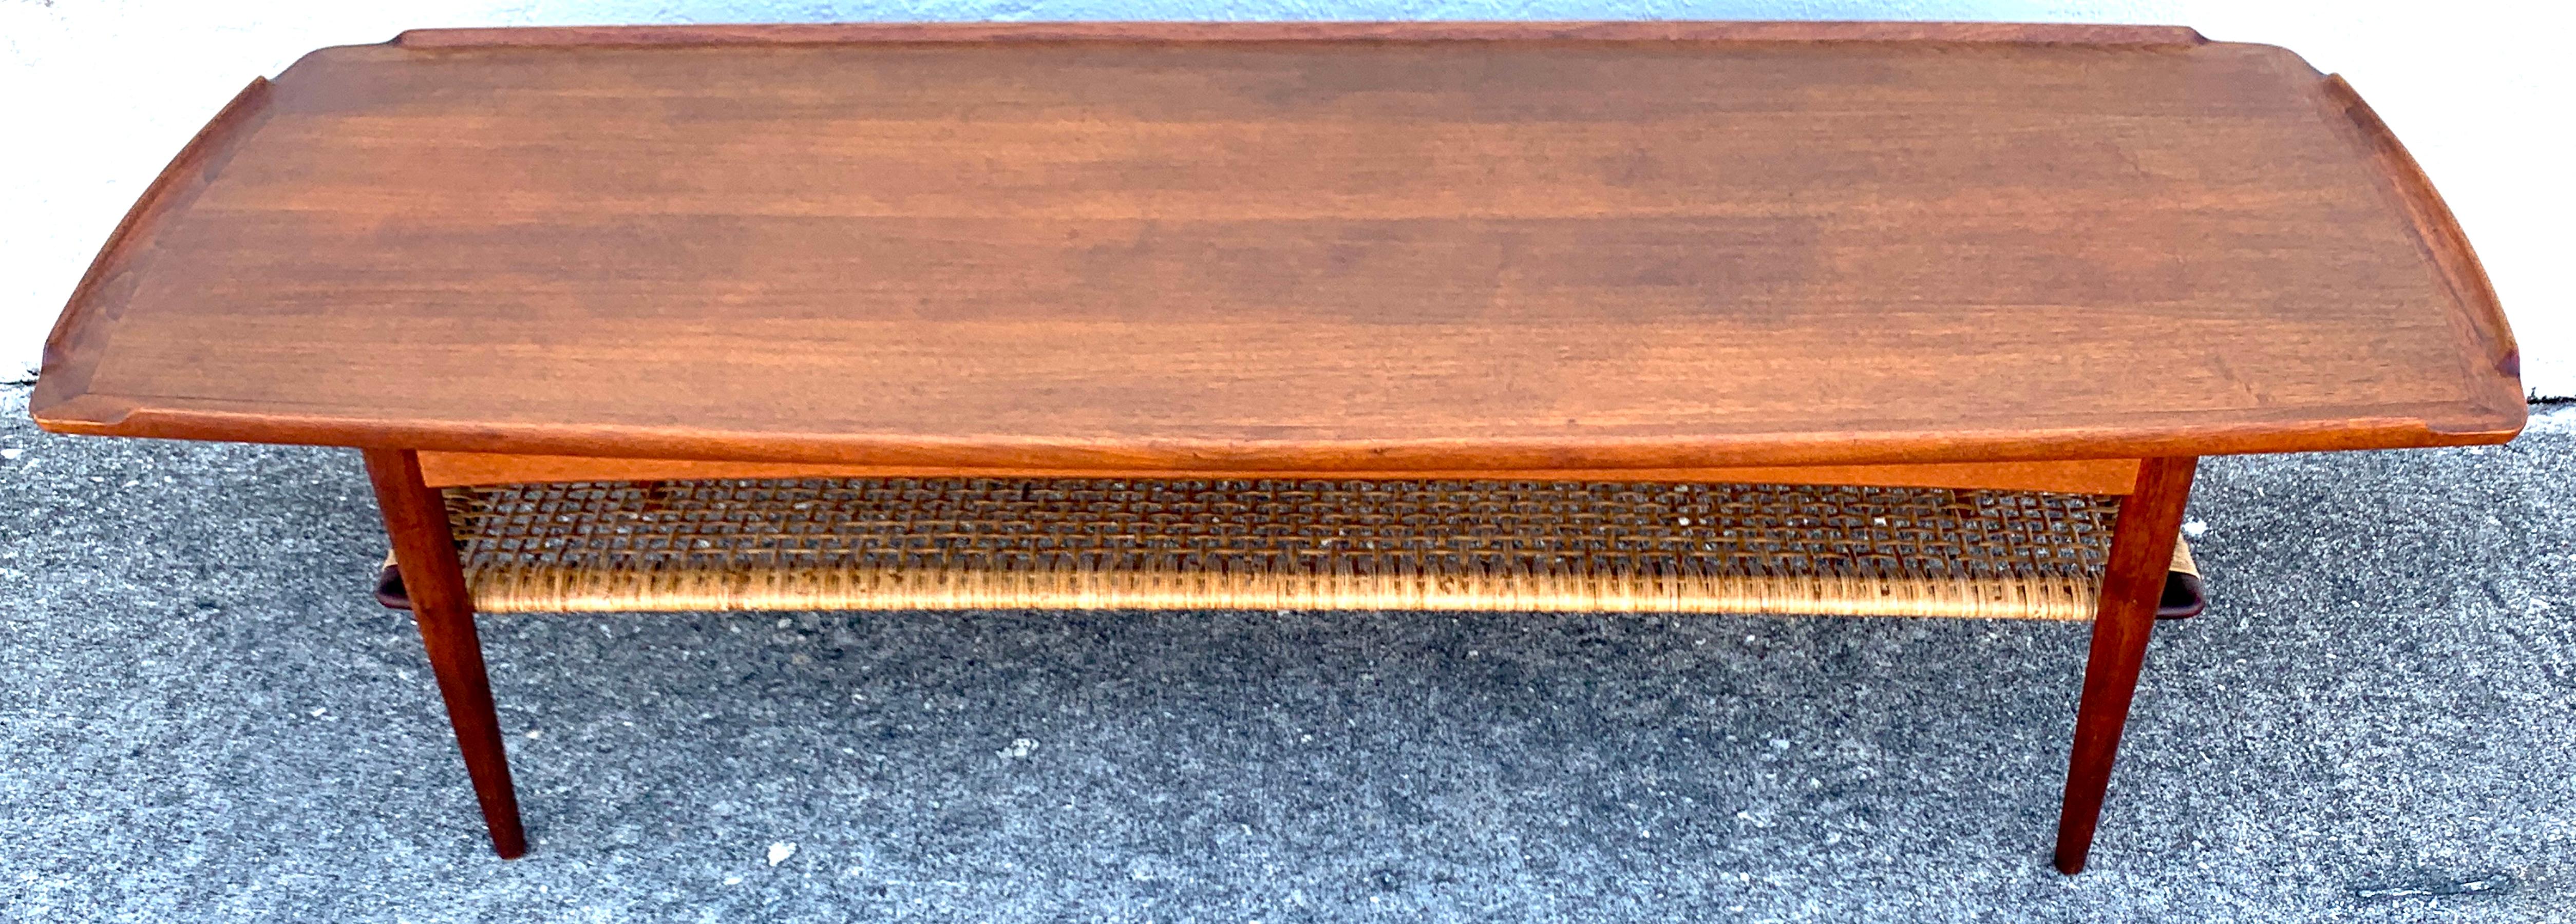 Two-tier teak surfboard coffee table with caned shelf, by Ib-Kofod Larsen, With canted corners with subtle partial gallery edge, with a beautiful handwoven caned
45